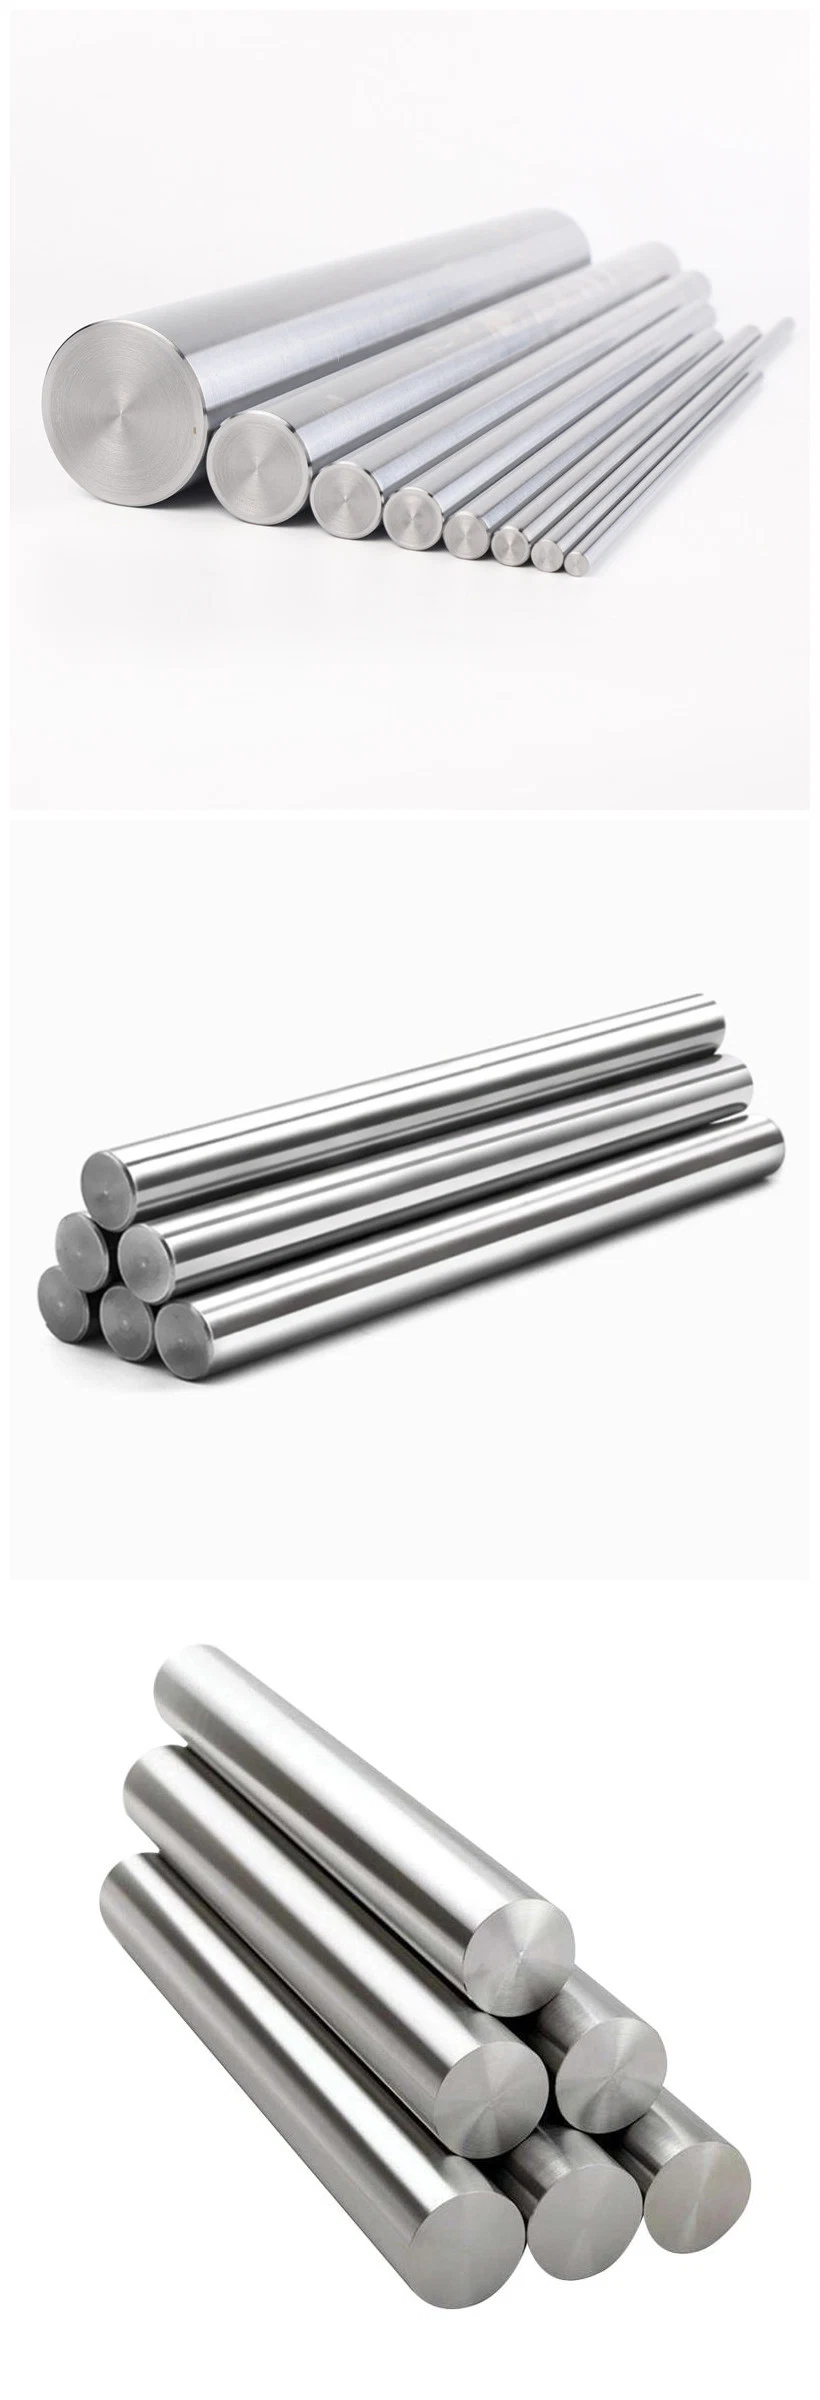 China Shaft Factory/Round Solid Hard Chrome Plated Linear Transmission Motion Rod